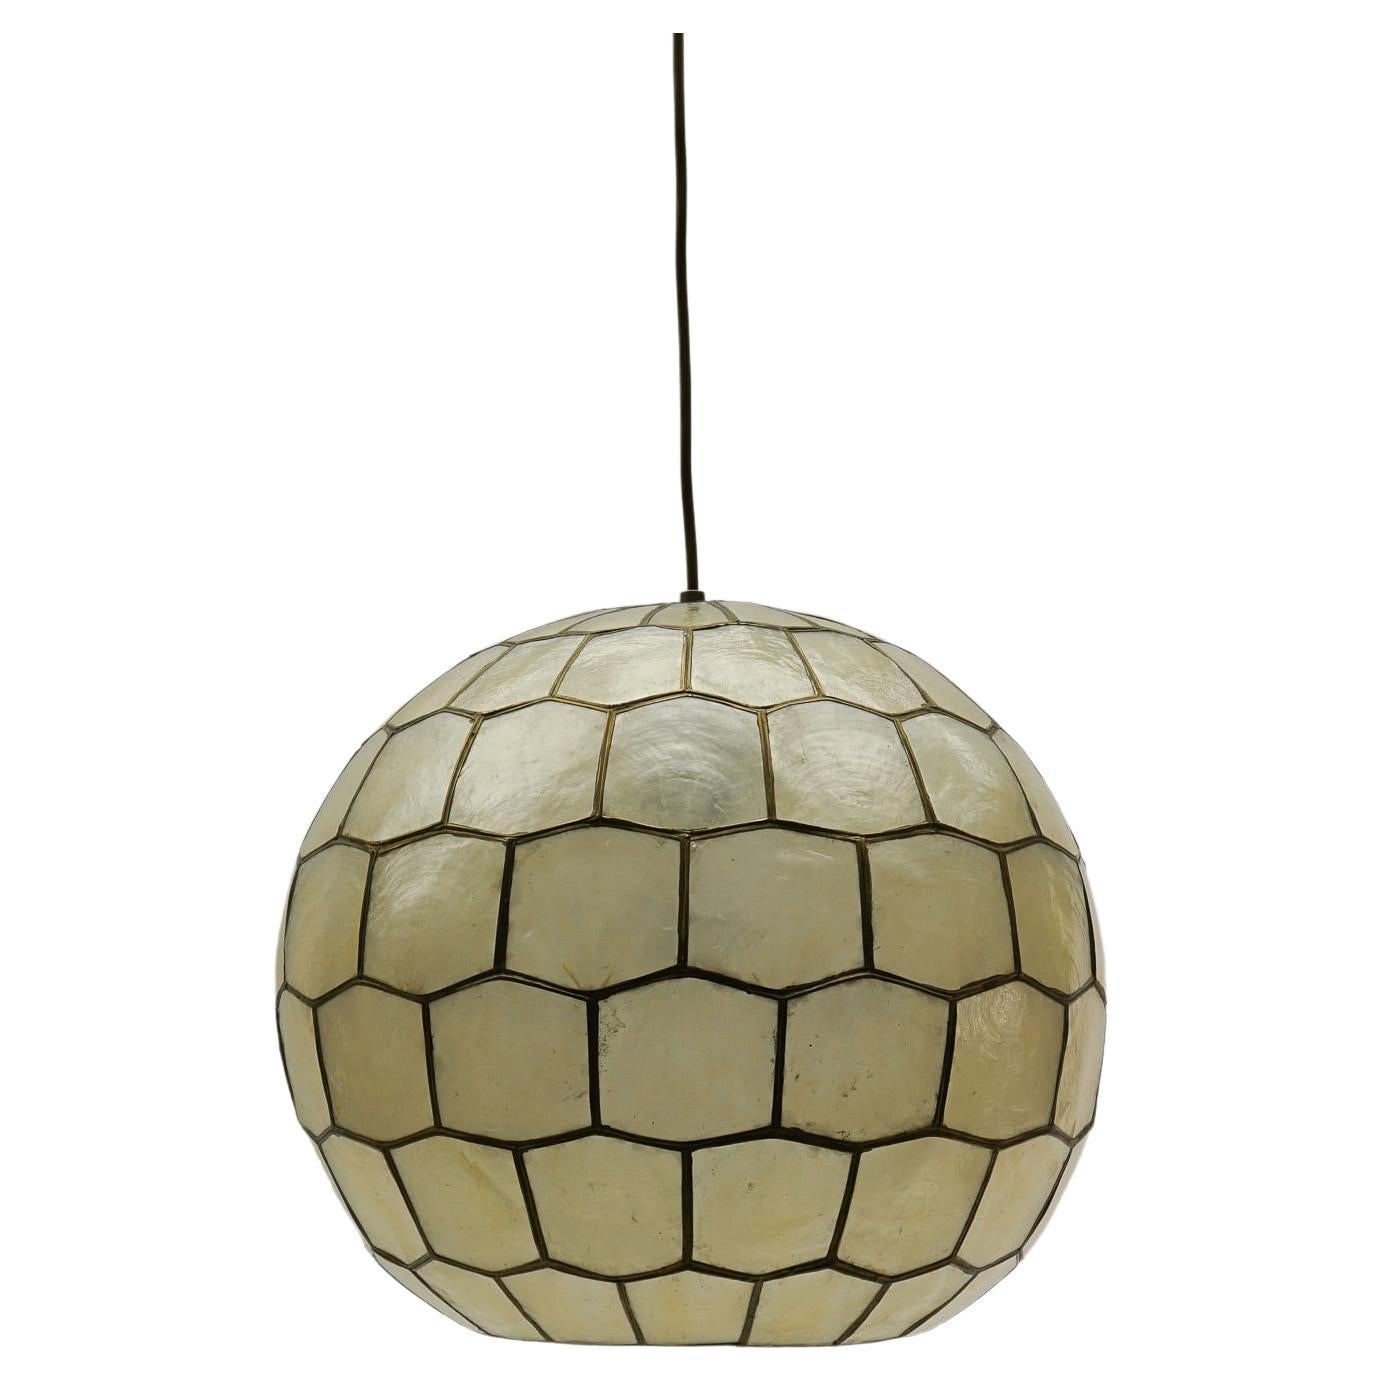 Lovely Mother-of-Pearl Ceiling Ball Lamp, 1960s